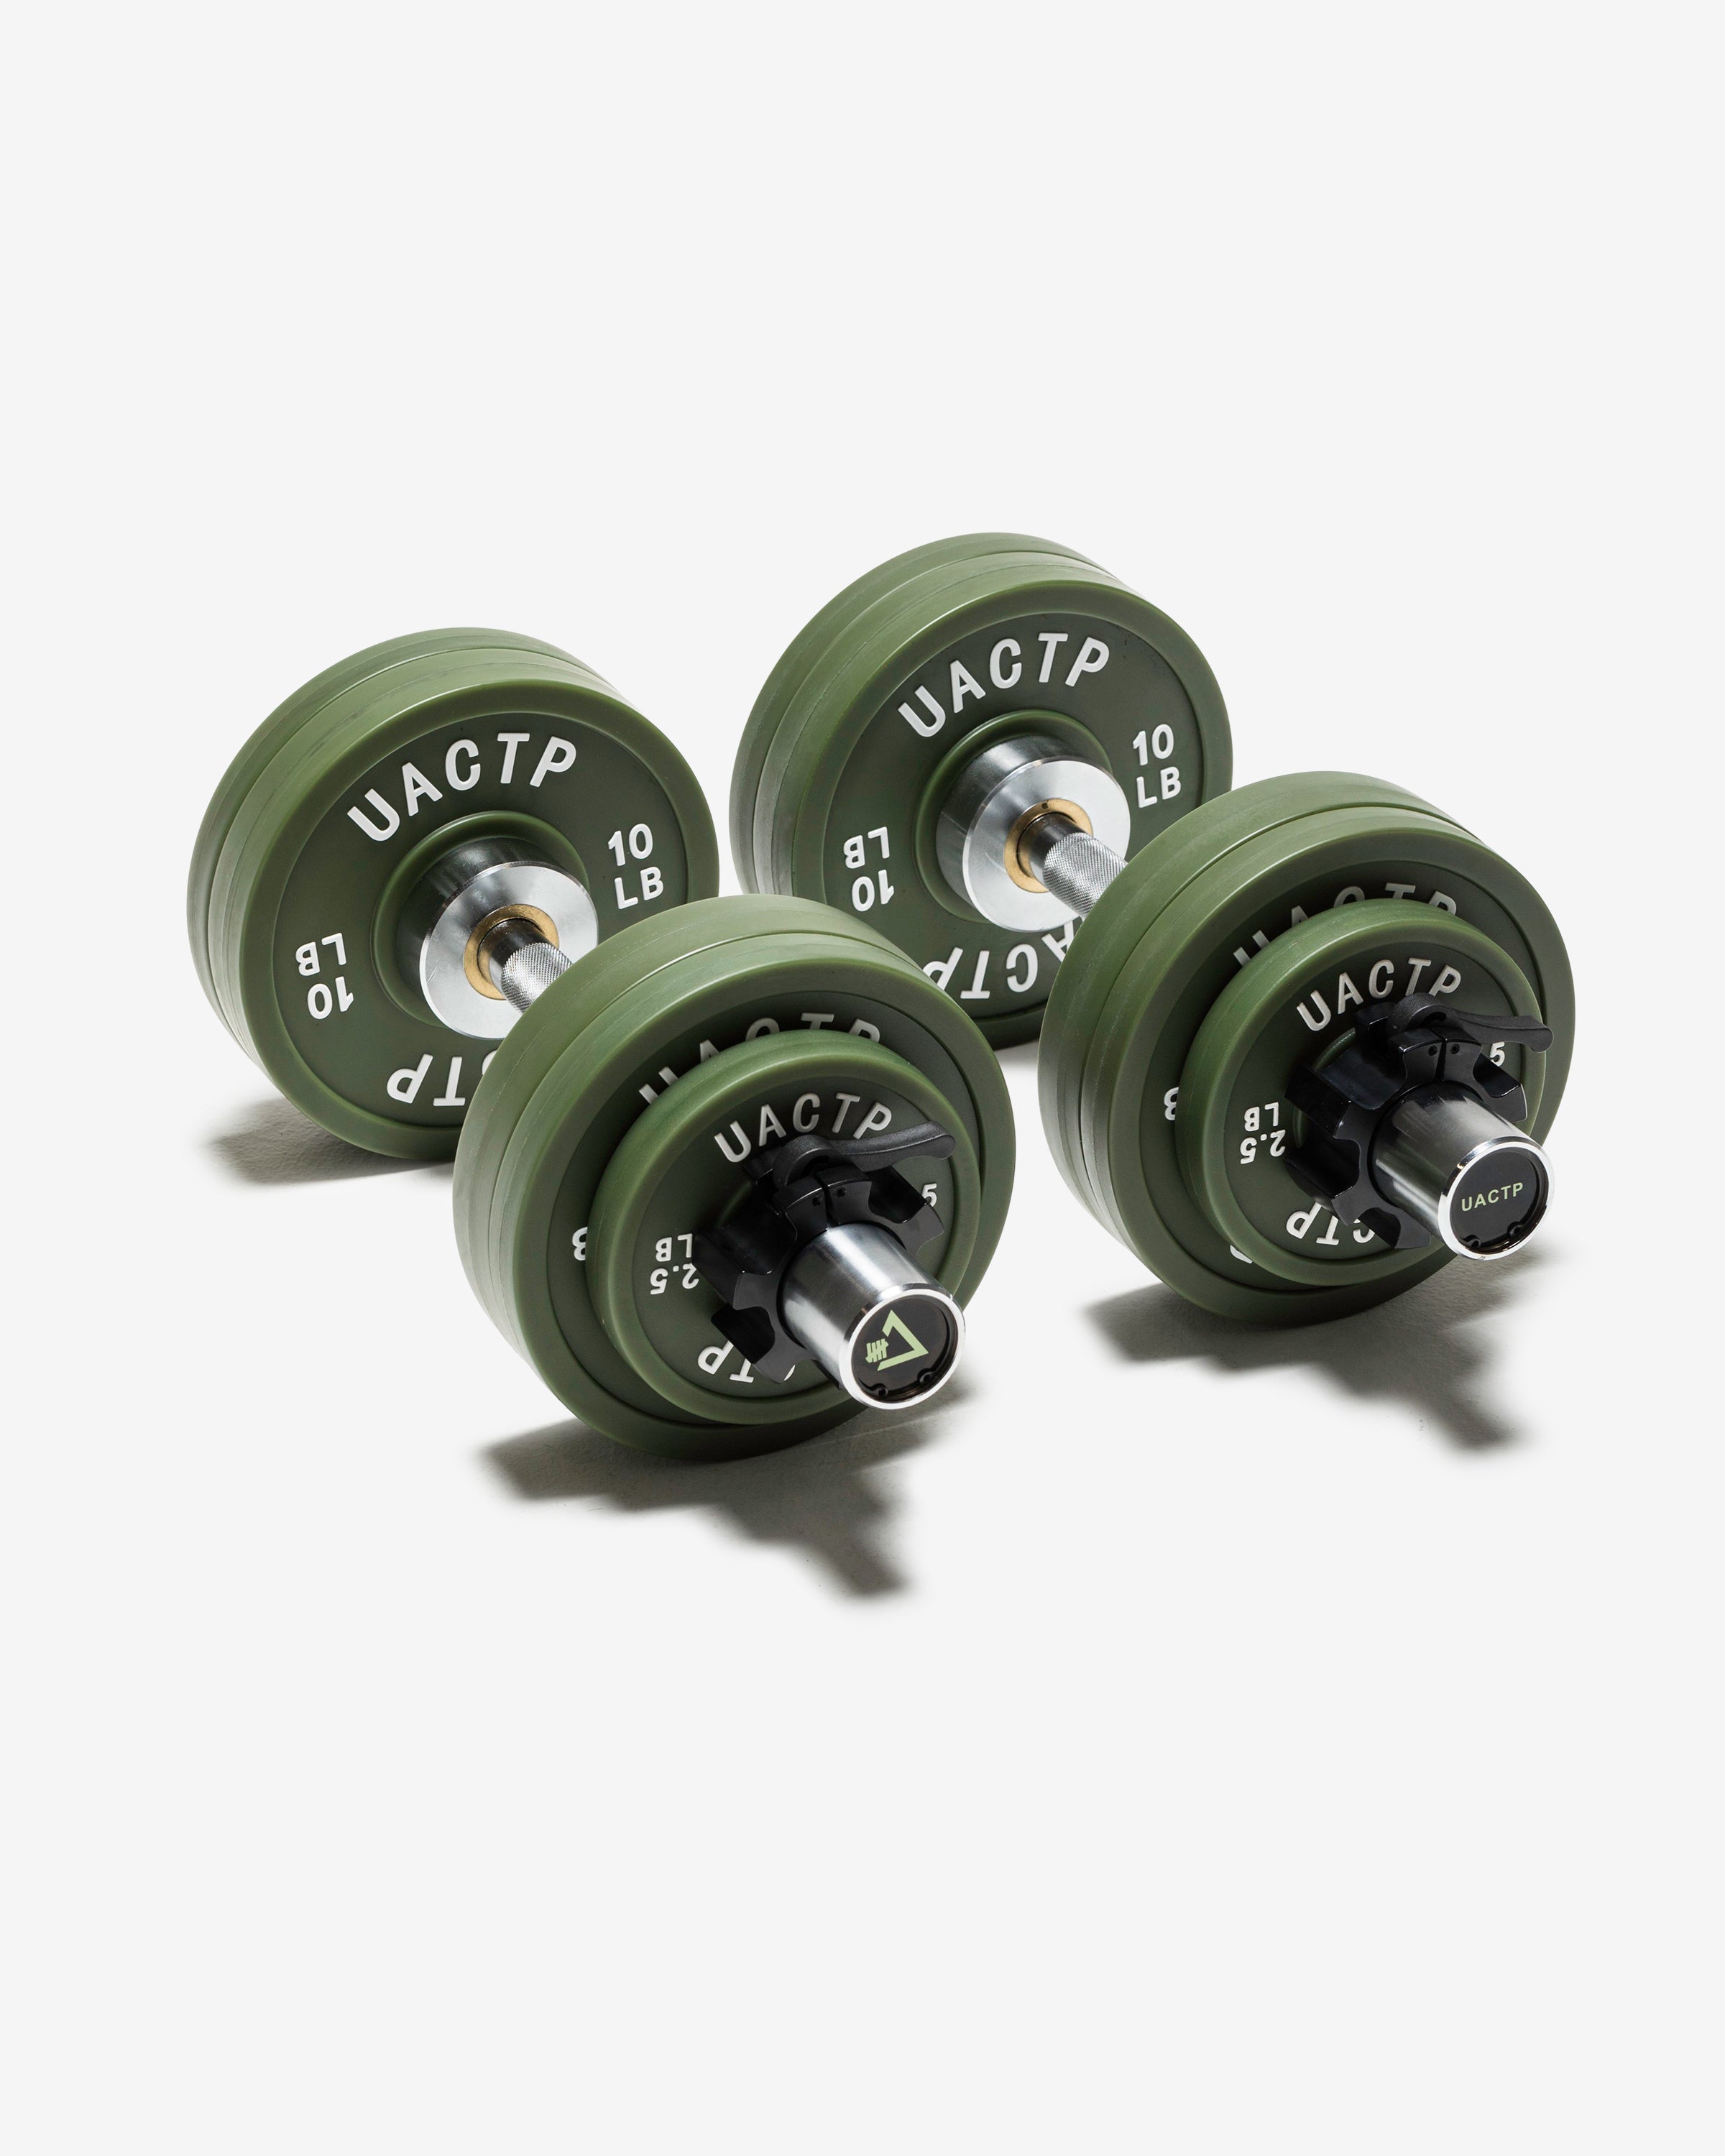 UACTP OLYMPIC DUMBBELL SET – Undefeated